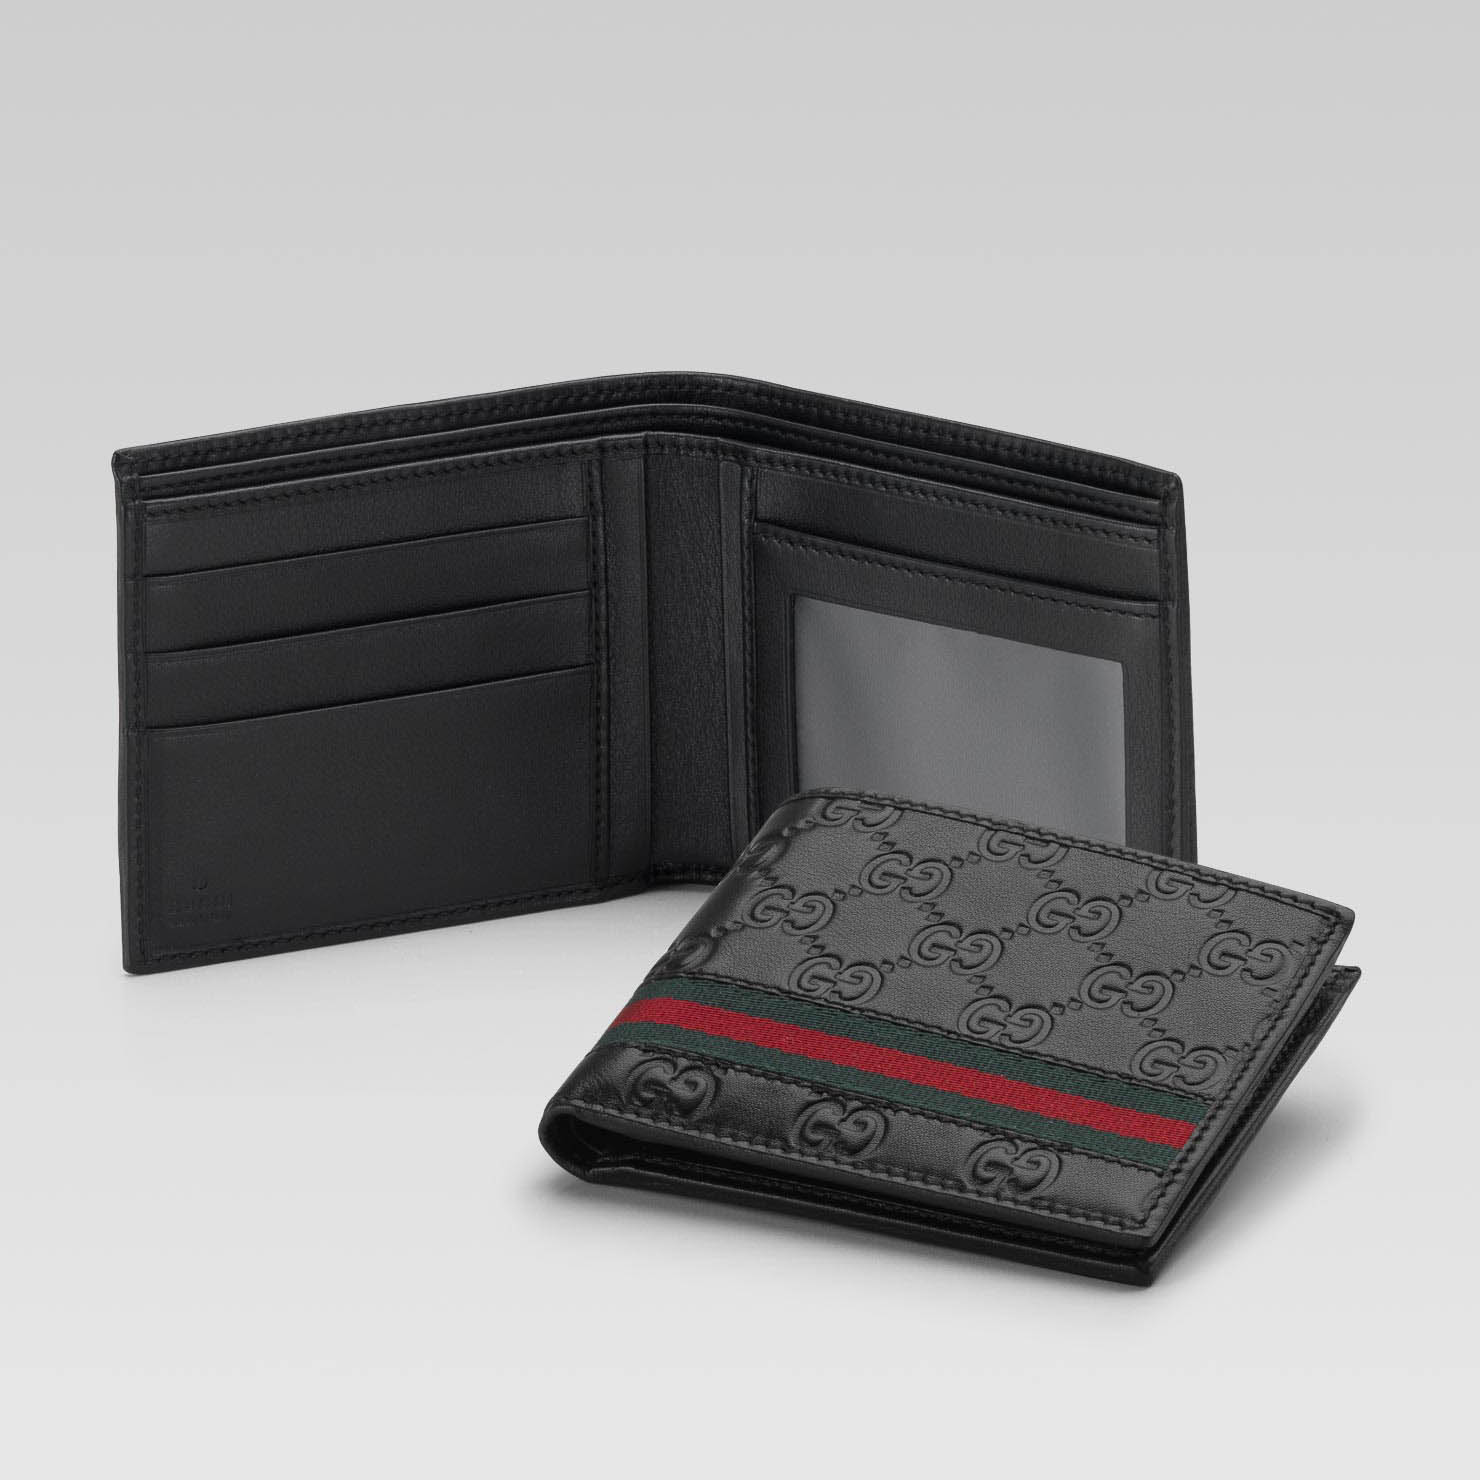 Fashion :: Bags & Wallets :: Wallets :: Gucci Wallet Chocolate Red Green - wcy.wat.edu.pl